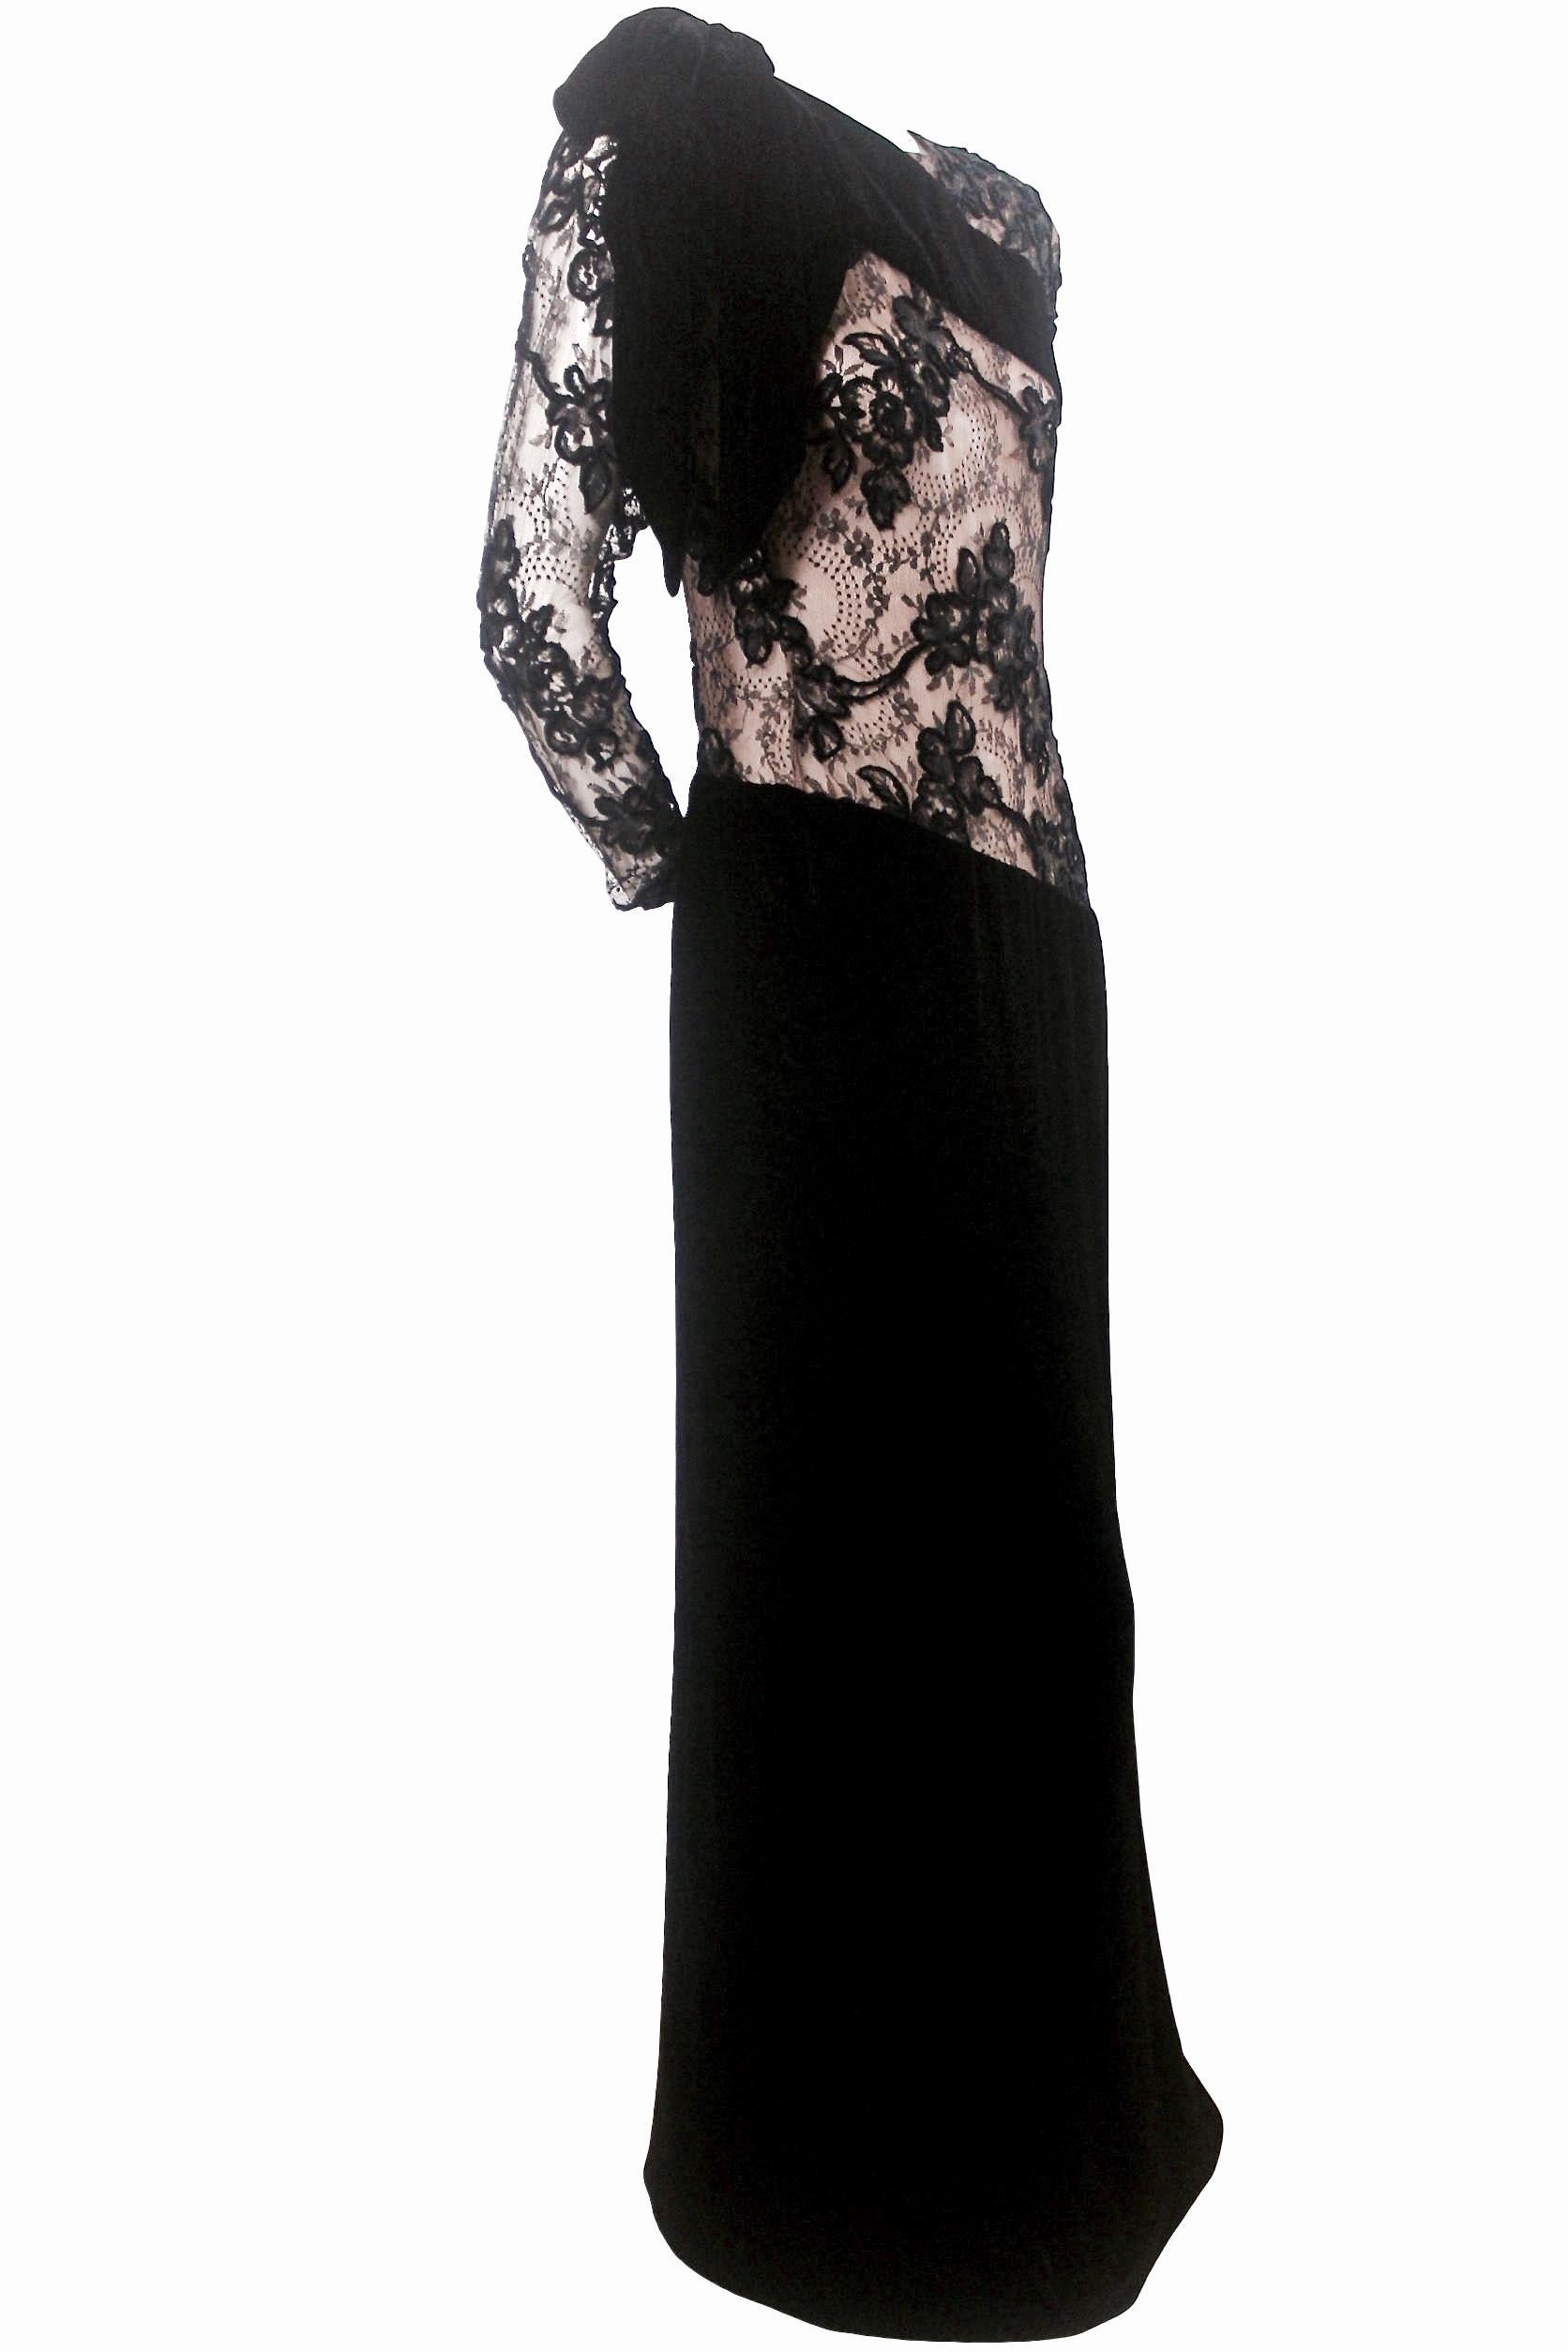 Jacqueline de Ribes Velvet and Lace Evening dress with Large Bows For Sale 1